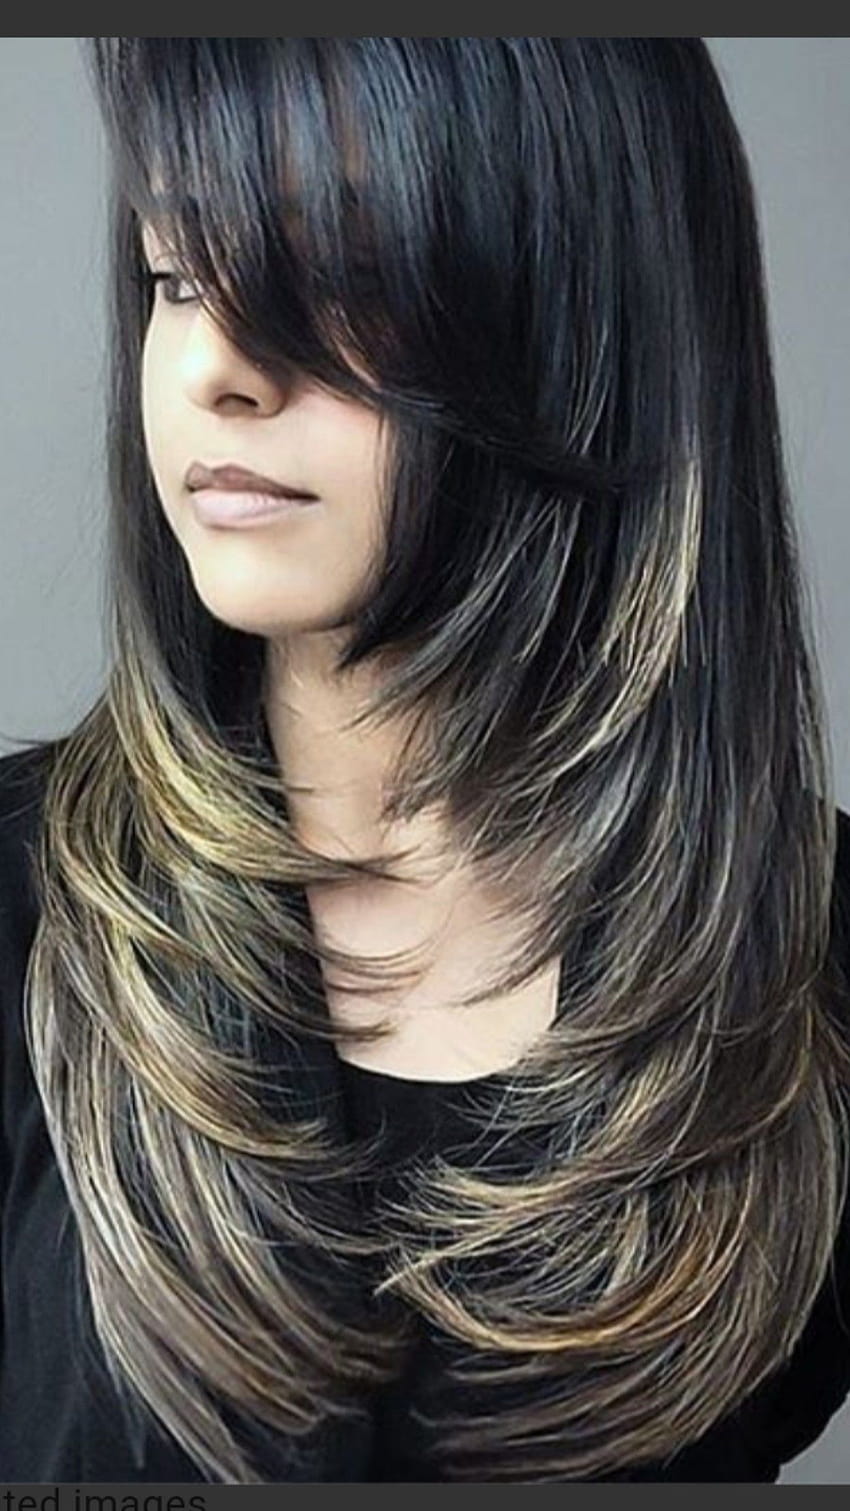 Having trouble finding the cut for you? Check out these layer cuts!